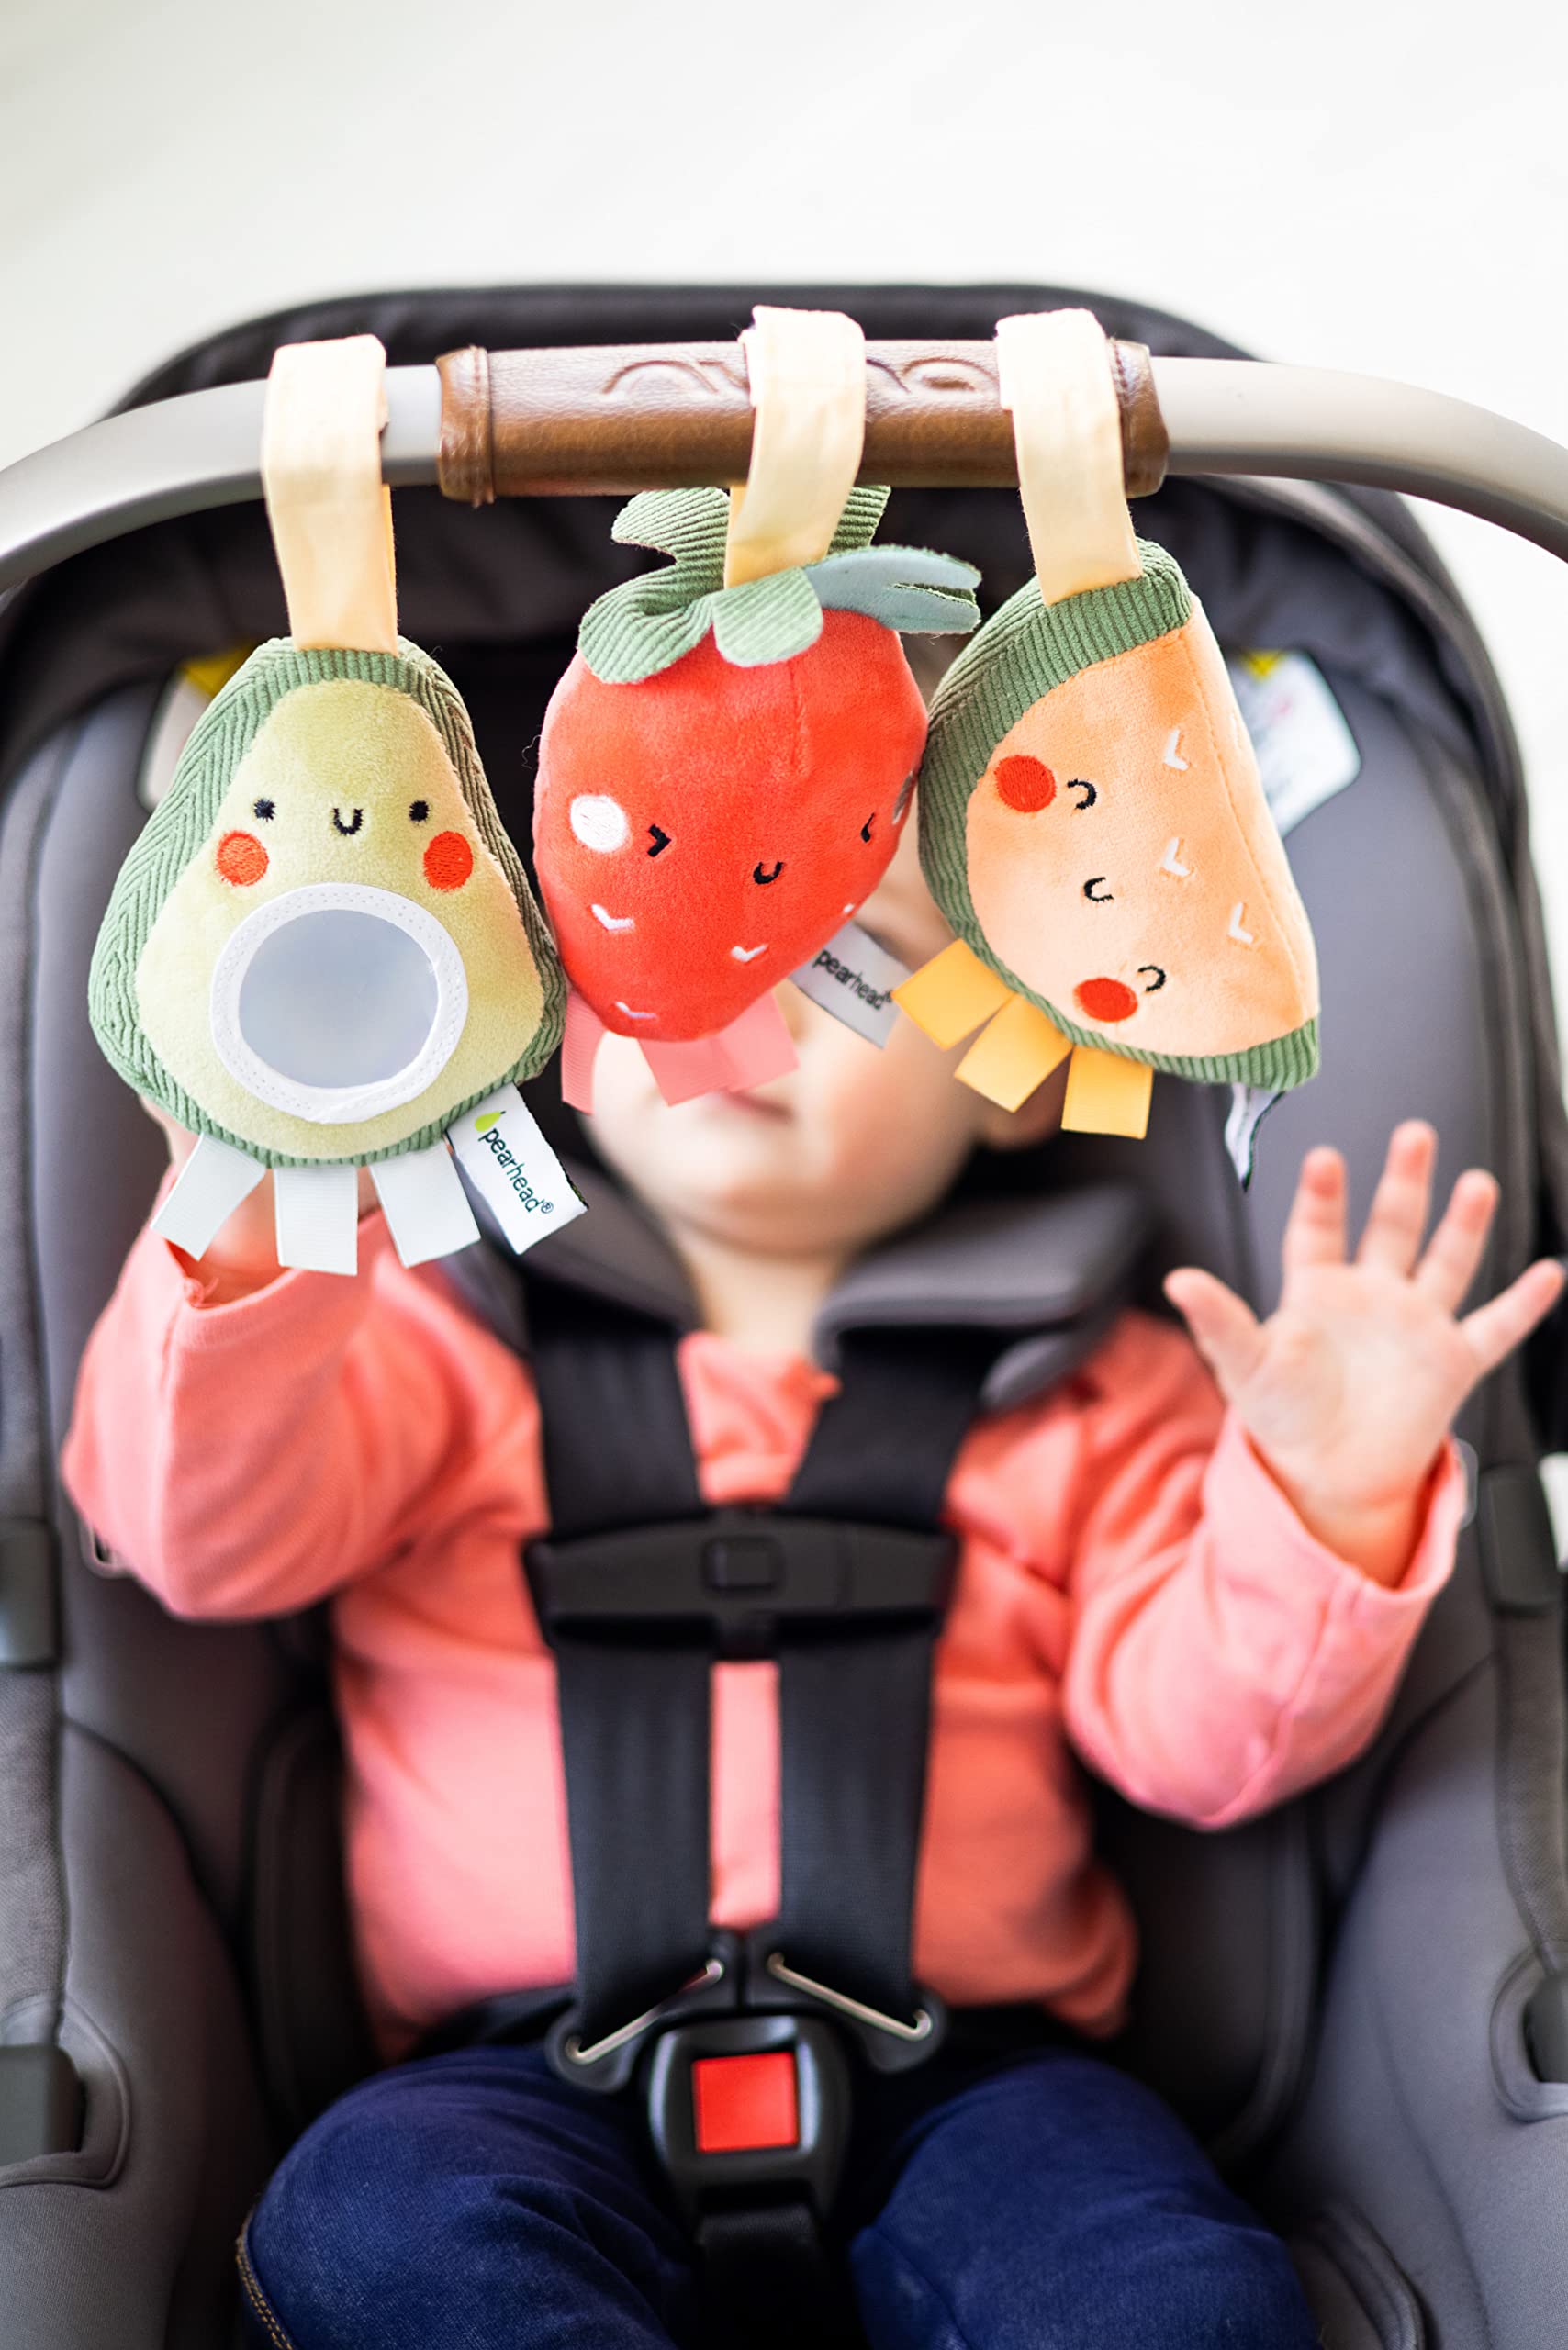 Pearhead Fruit Stroller Toys, Plush Corduroy Baby Travel Car Seat Toy Set, Baby Hanging Interactive Toys, Gender-Neutral Baby Travel Accessories, Strawberry Avocado Watermelon Set of 3